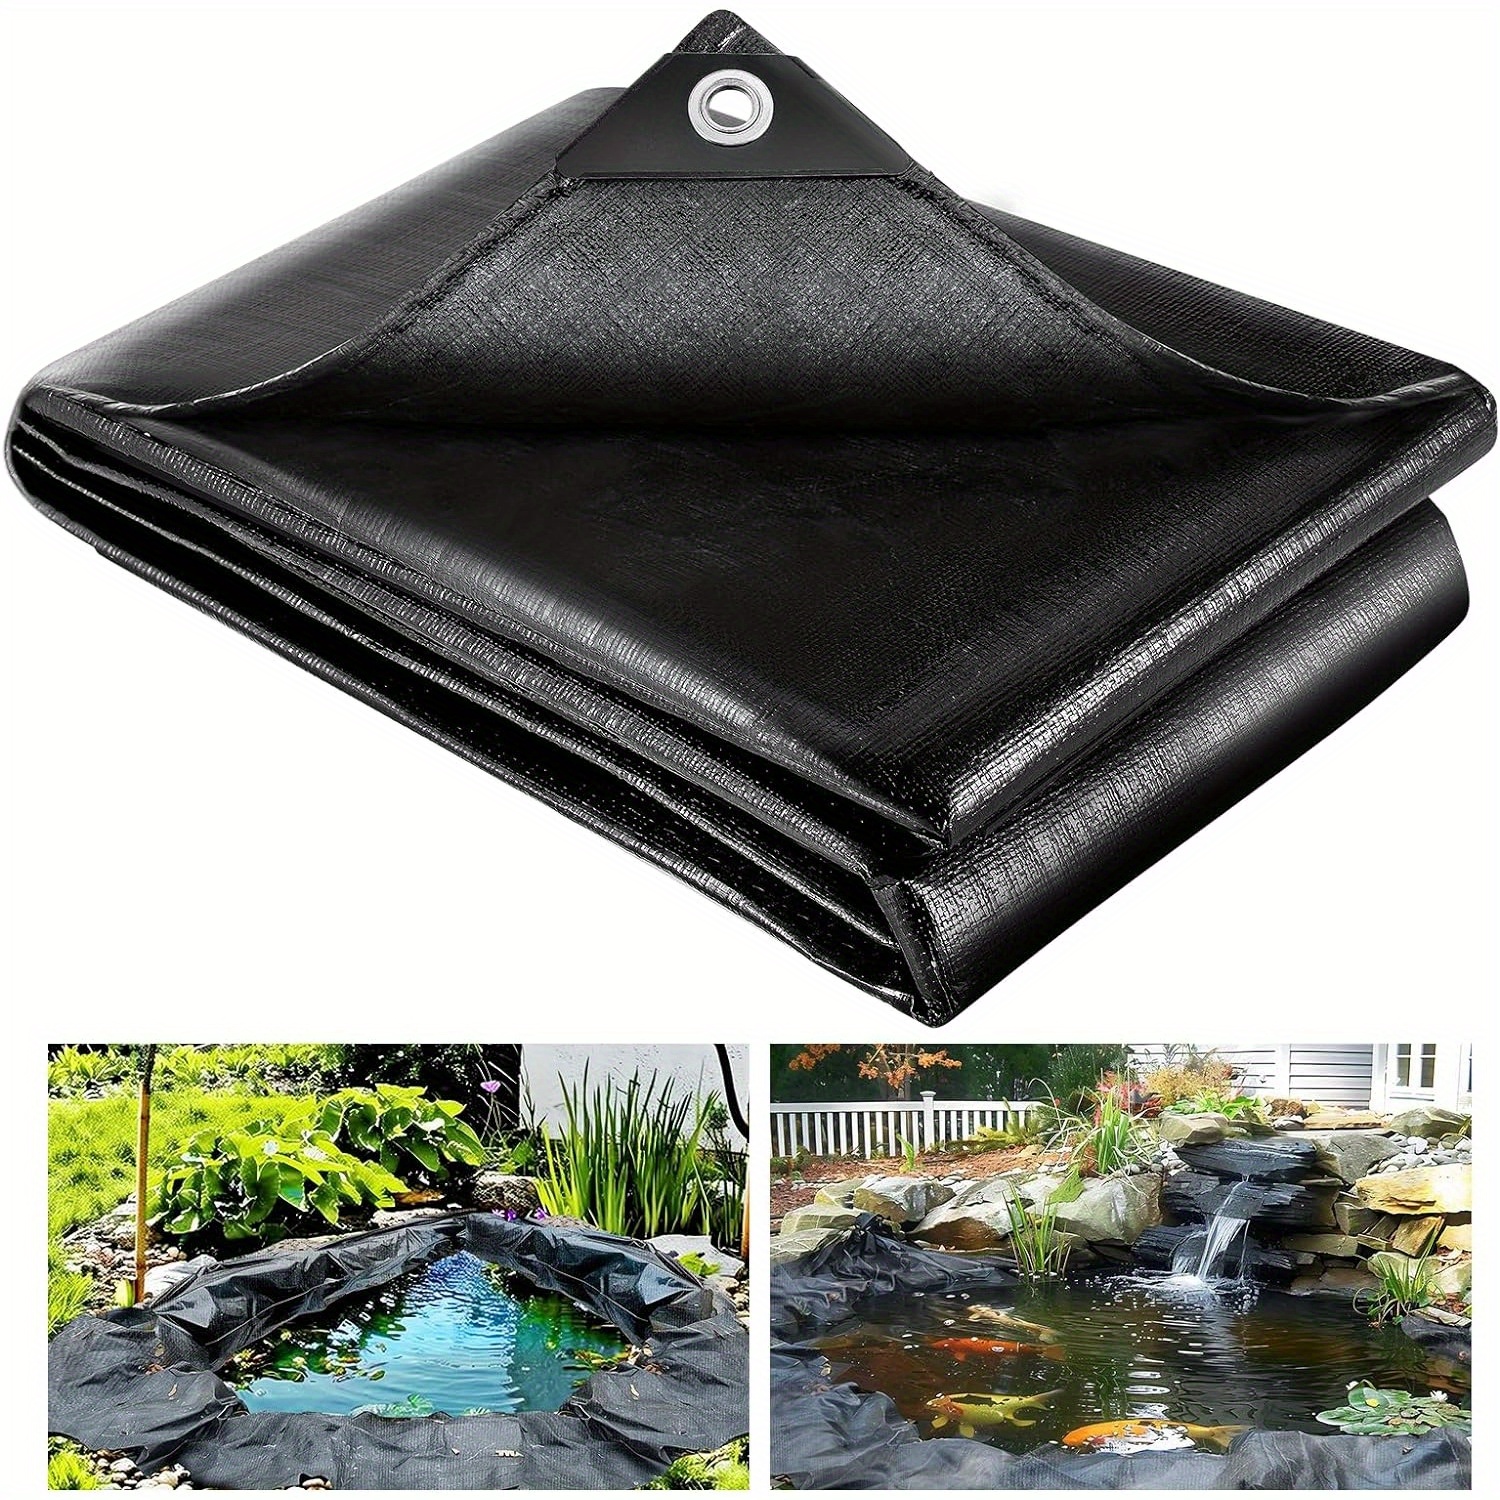 

20 Mil Black Hdpe Pond Skin, For Outdoor Ponds, Water Gardens, Waterfall, Fountain, Fish Koi Ponds